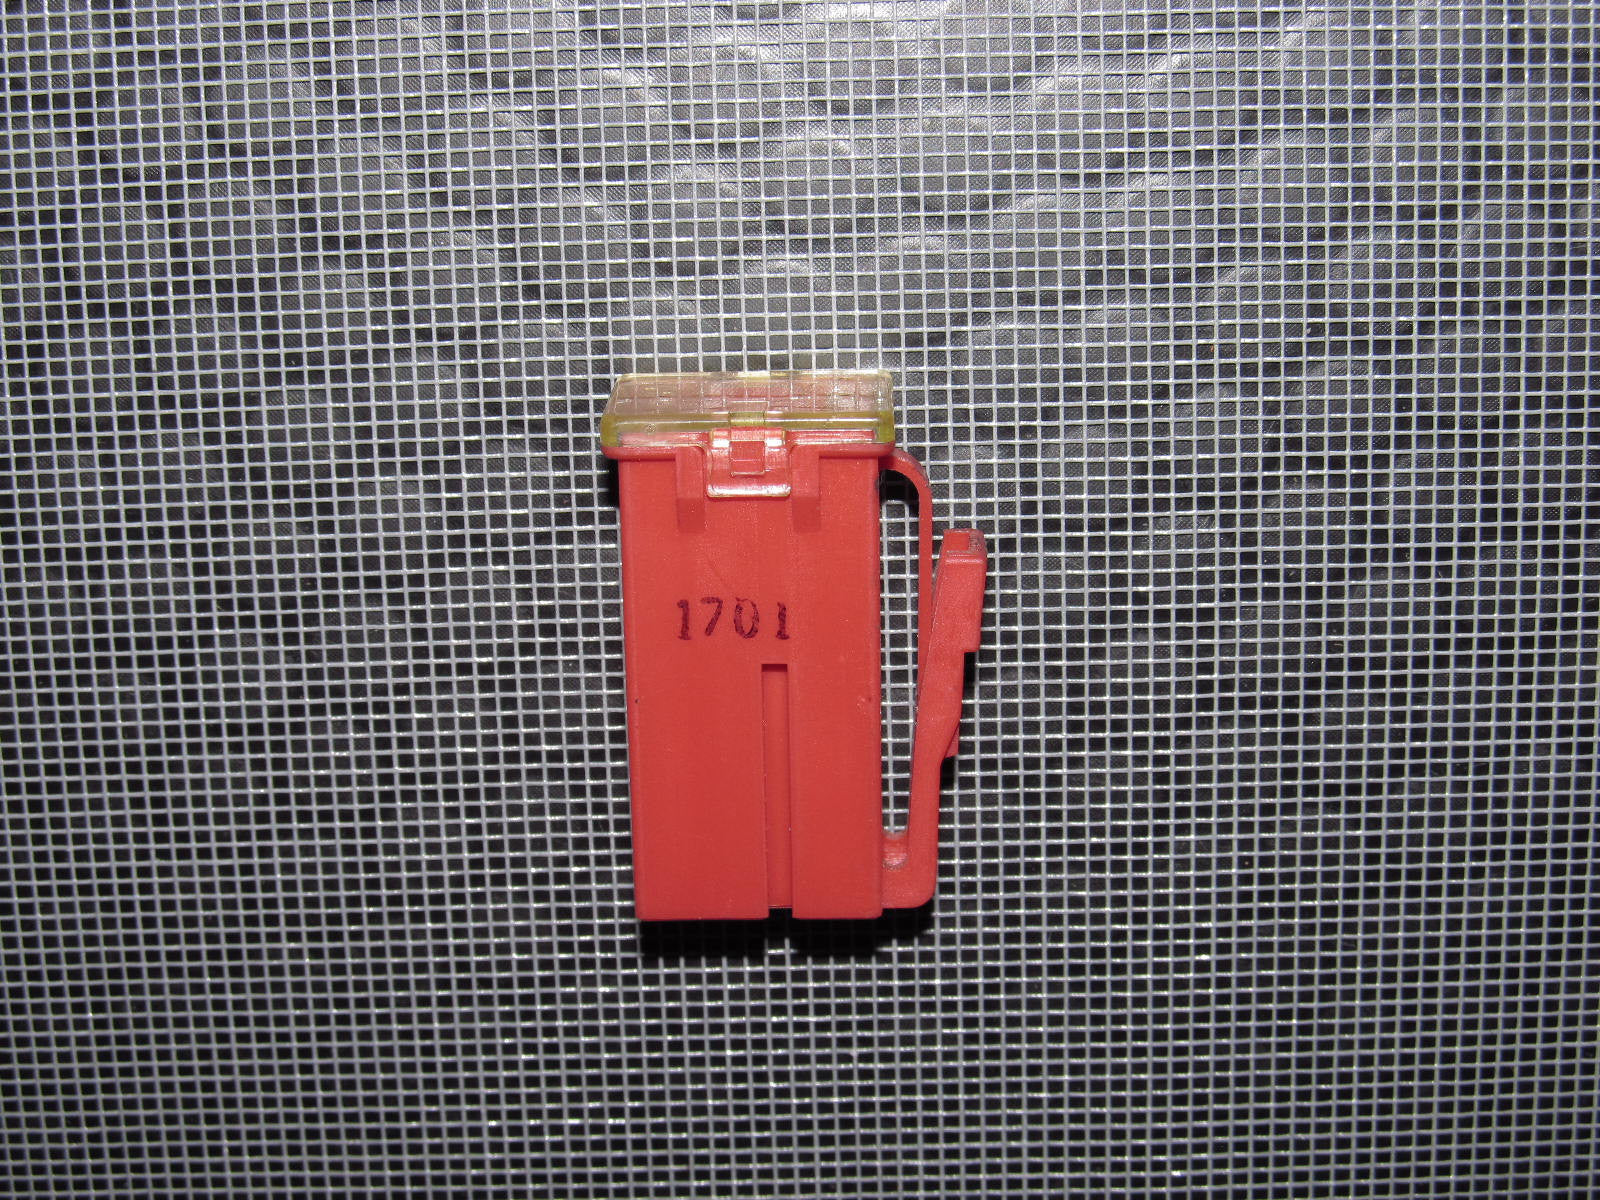 Universal 45A Pal Fuse - Red